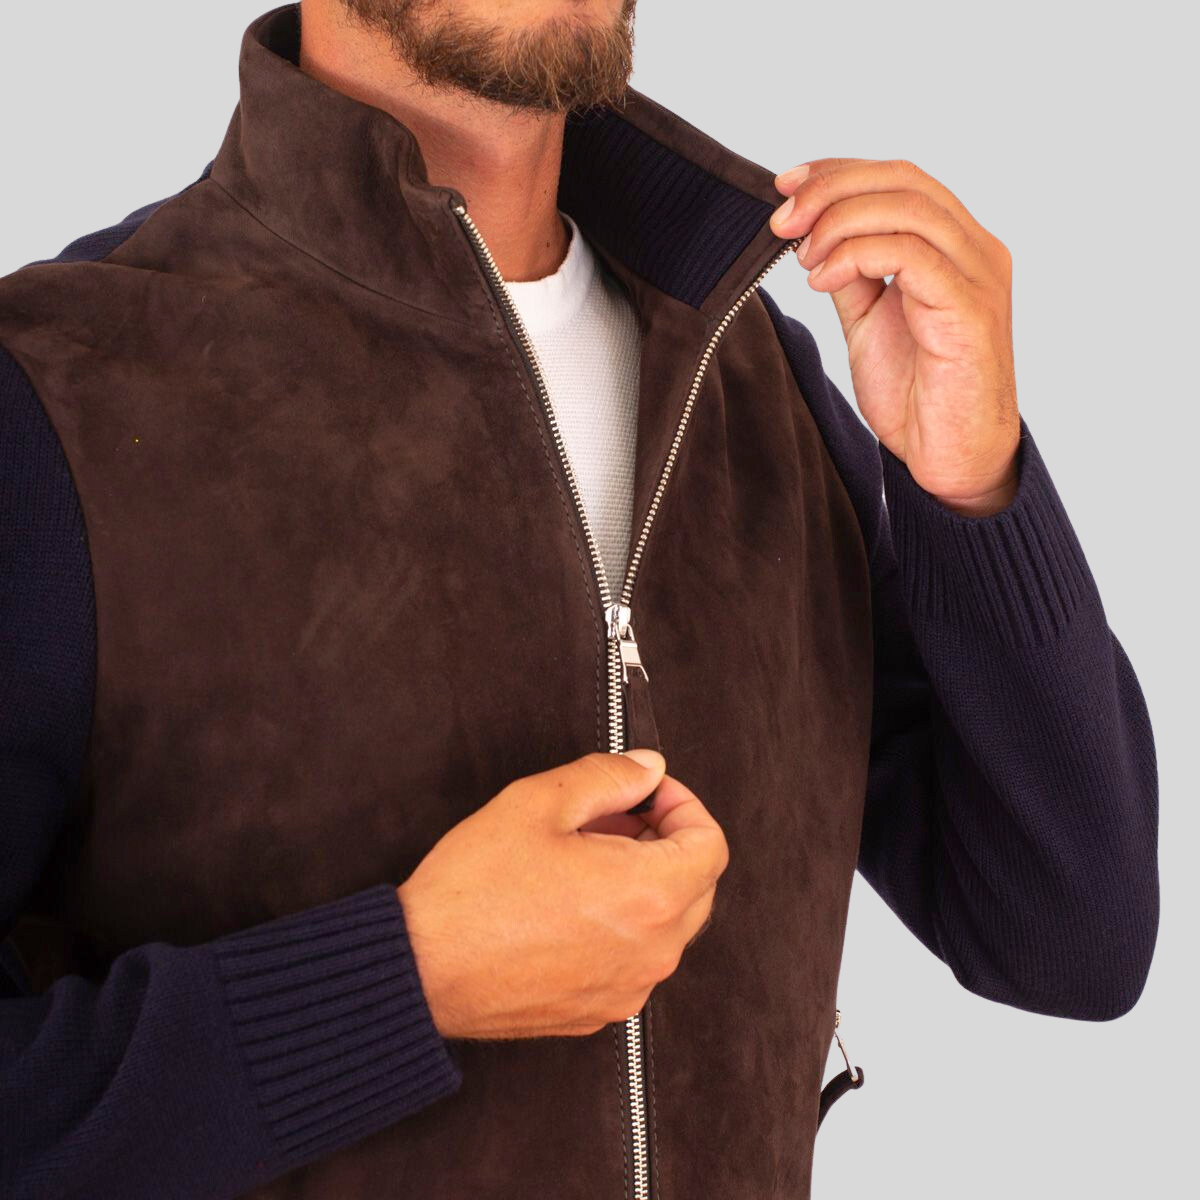 Gotstyle Fashion - The Jack Leathers Jackets Suede / Knit Hybrid Double Zip Jacket - Brown/Navy